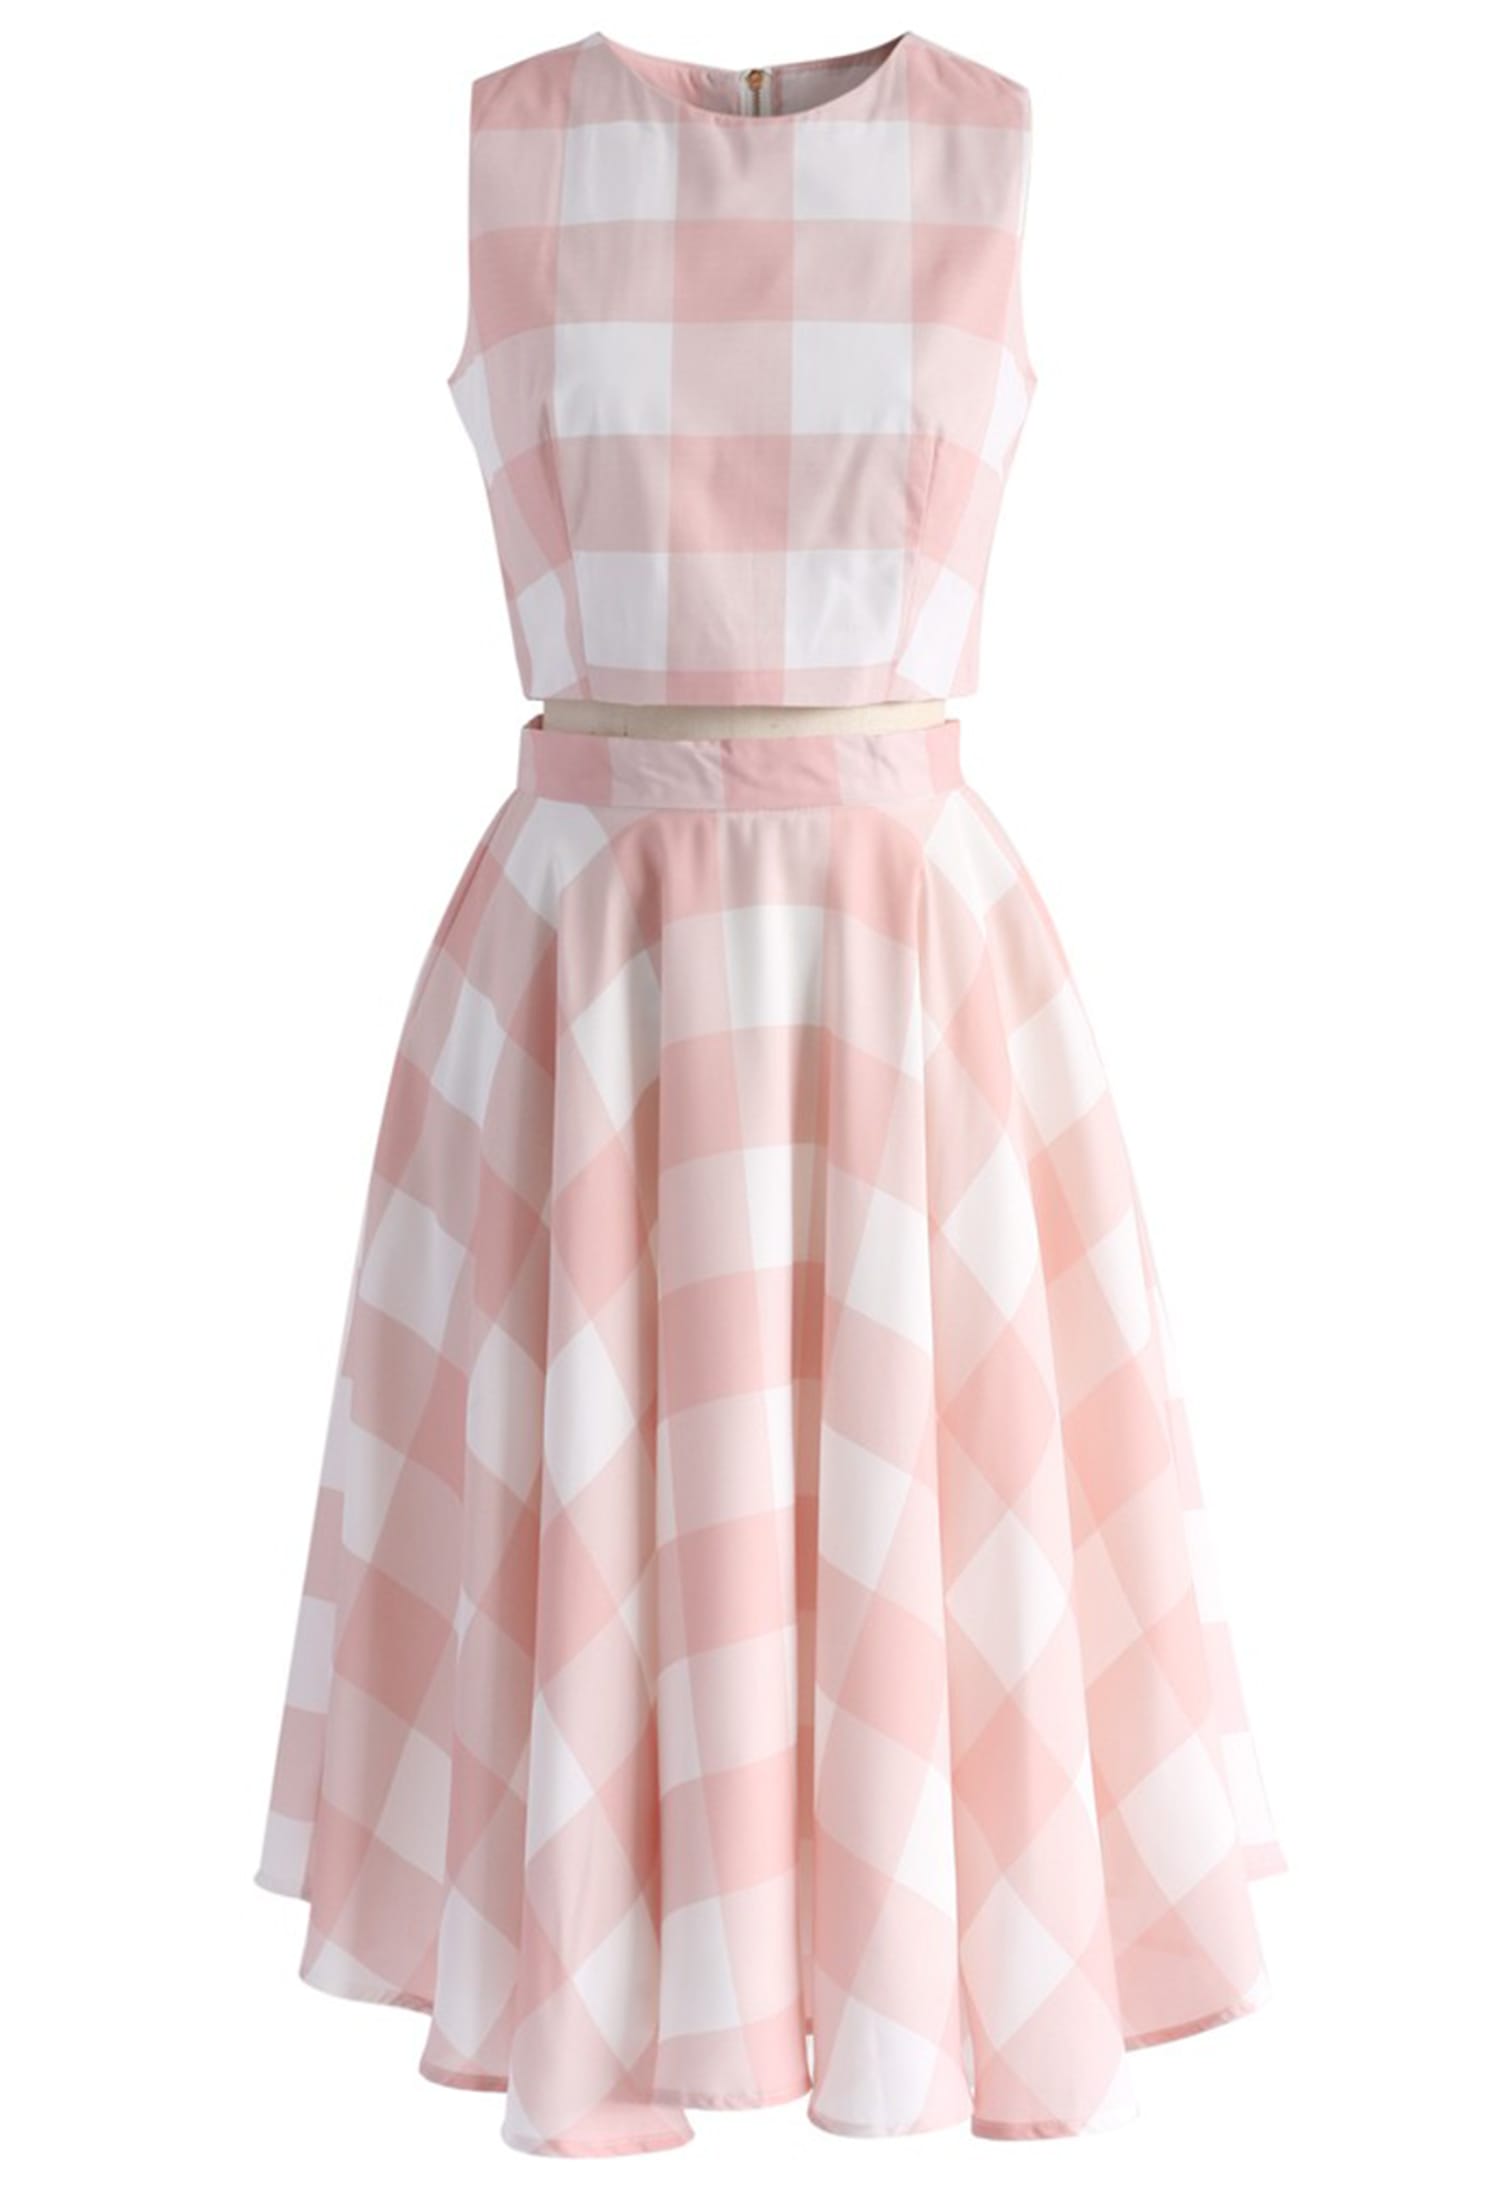 The Perfect White And Pink Gingham Dress  Pink gingham dress, Checkered  dress outfit, Gingham outfit